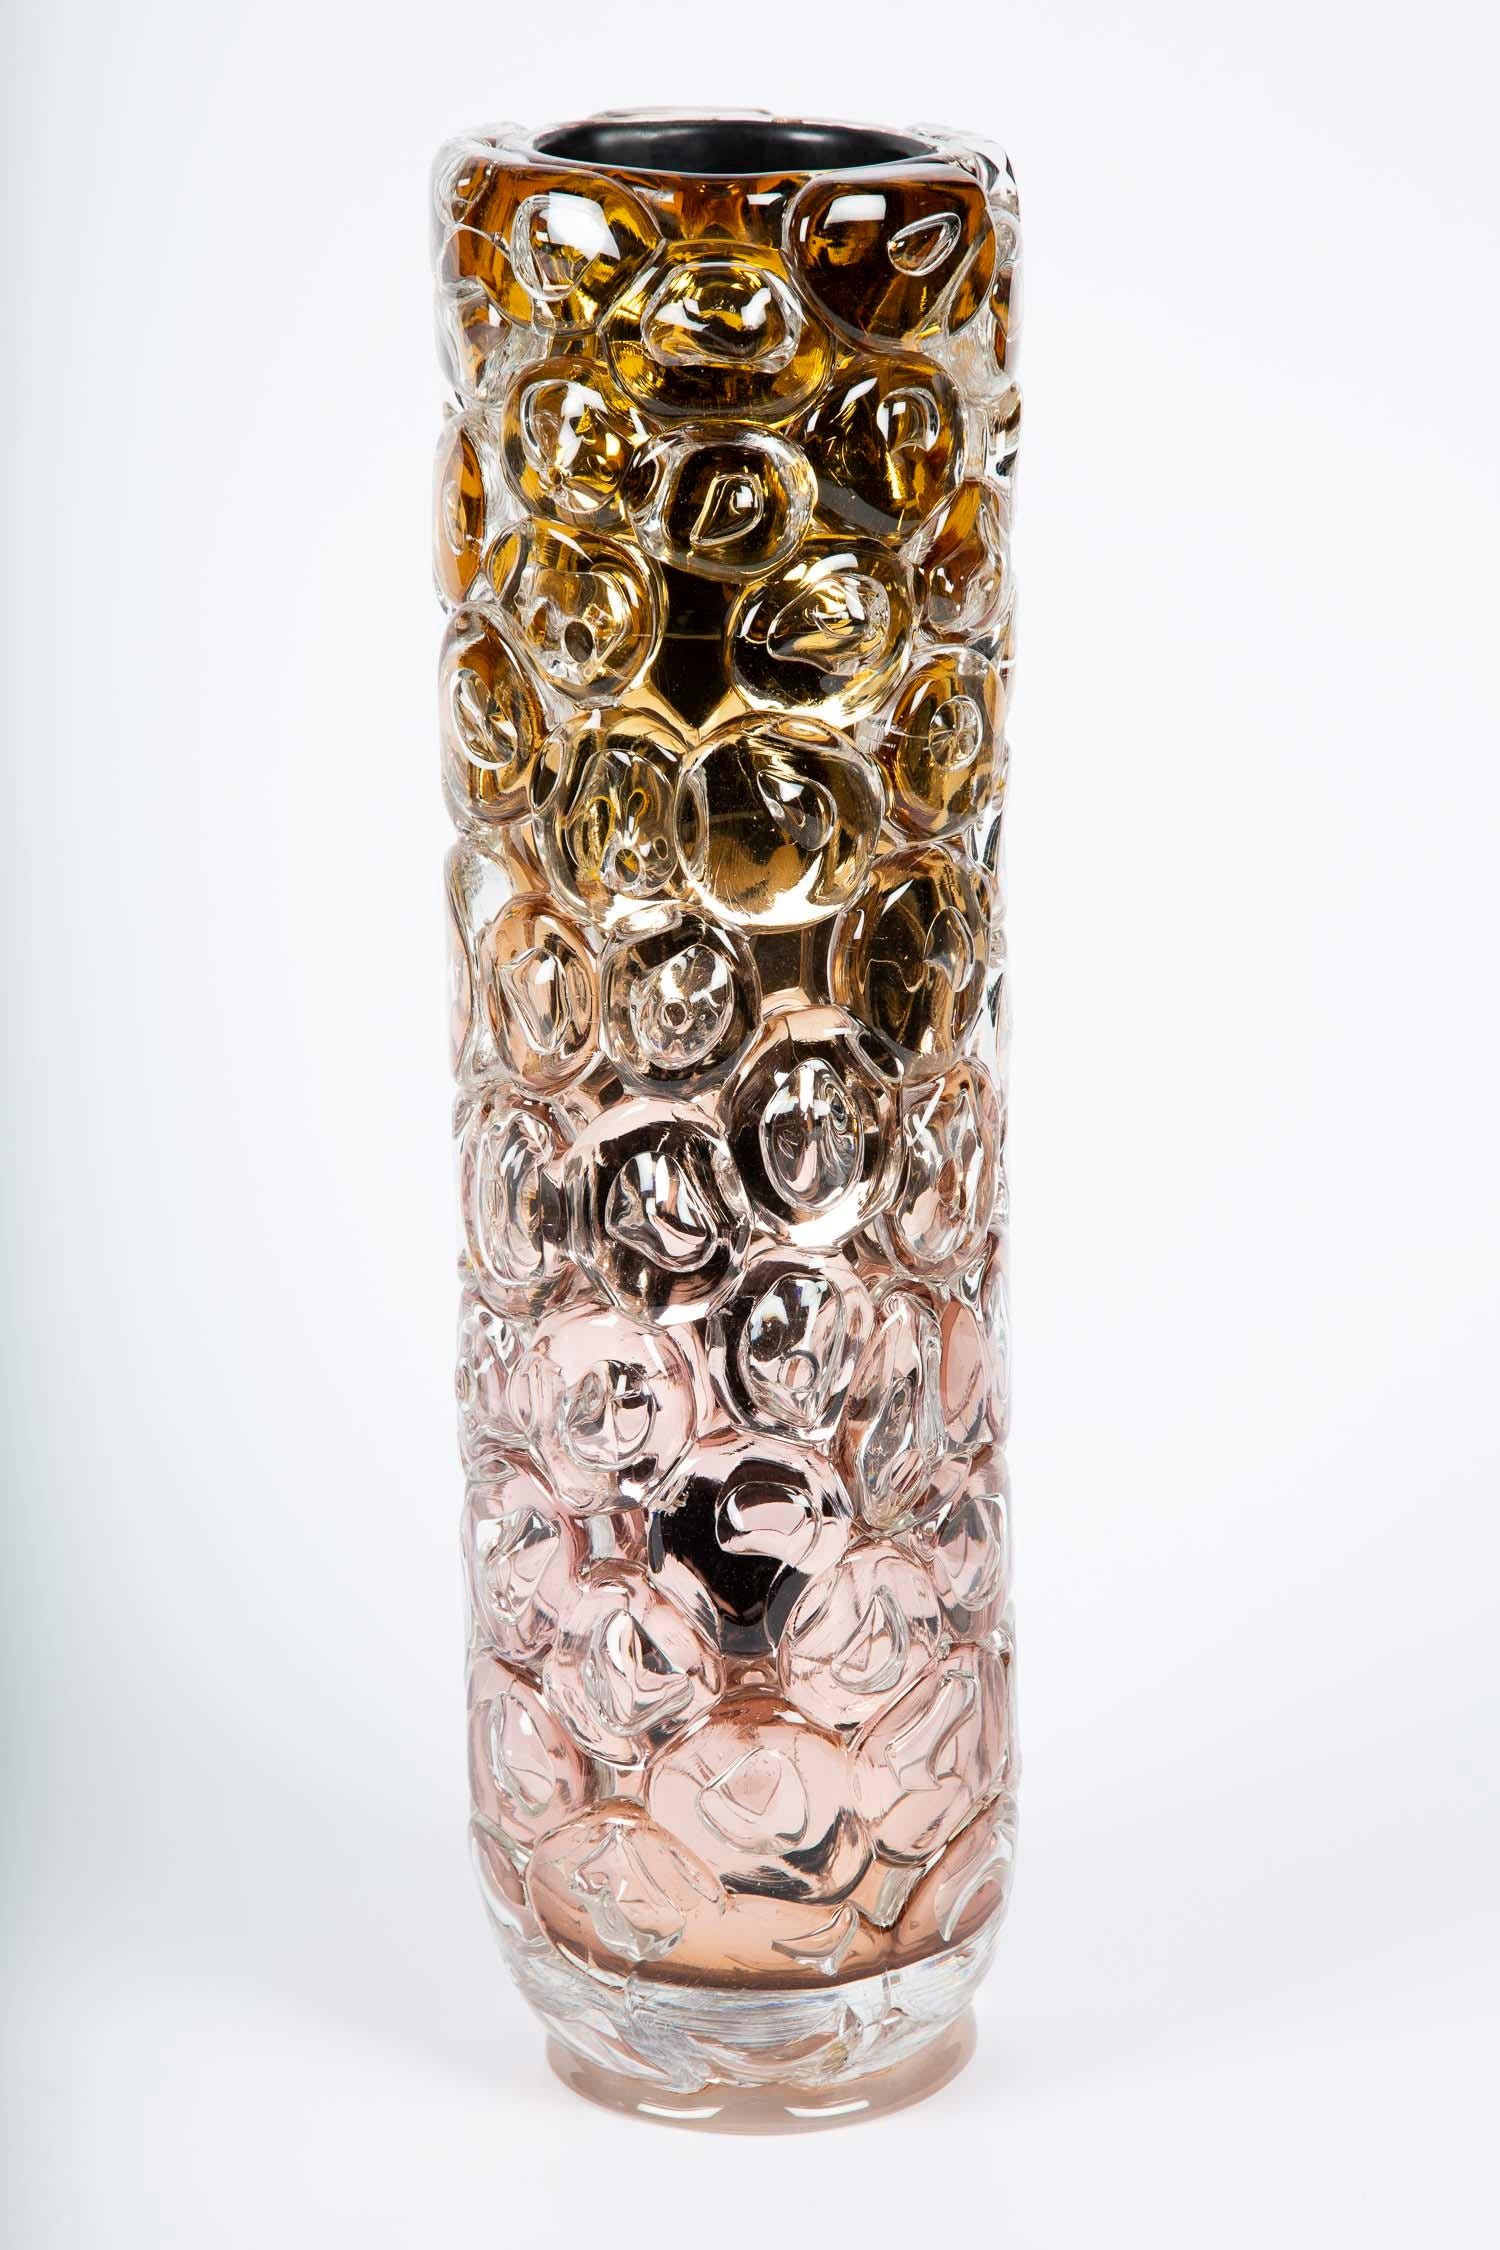 Bubblewrap in Gold is a hand-blown and sculpted vase created from pink and gold glass, with a mirrored interior by the British artist Allister Malcolm. Playful yet elegant, Malcolm has formed oversized bubbles on the exterior of this handcrafted and